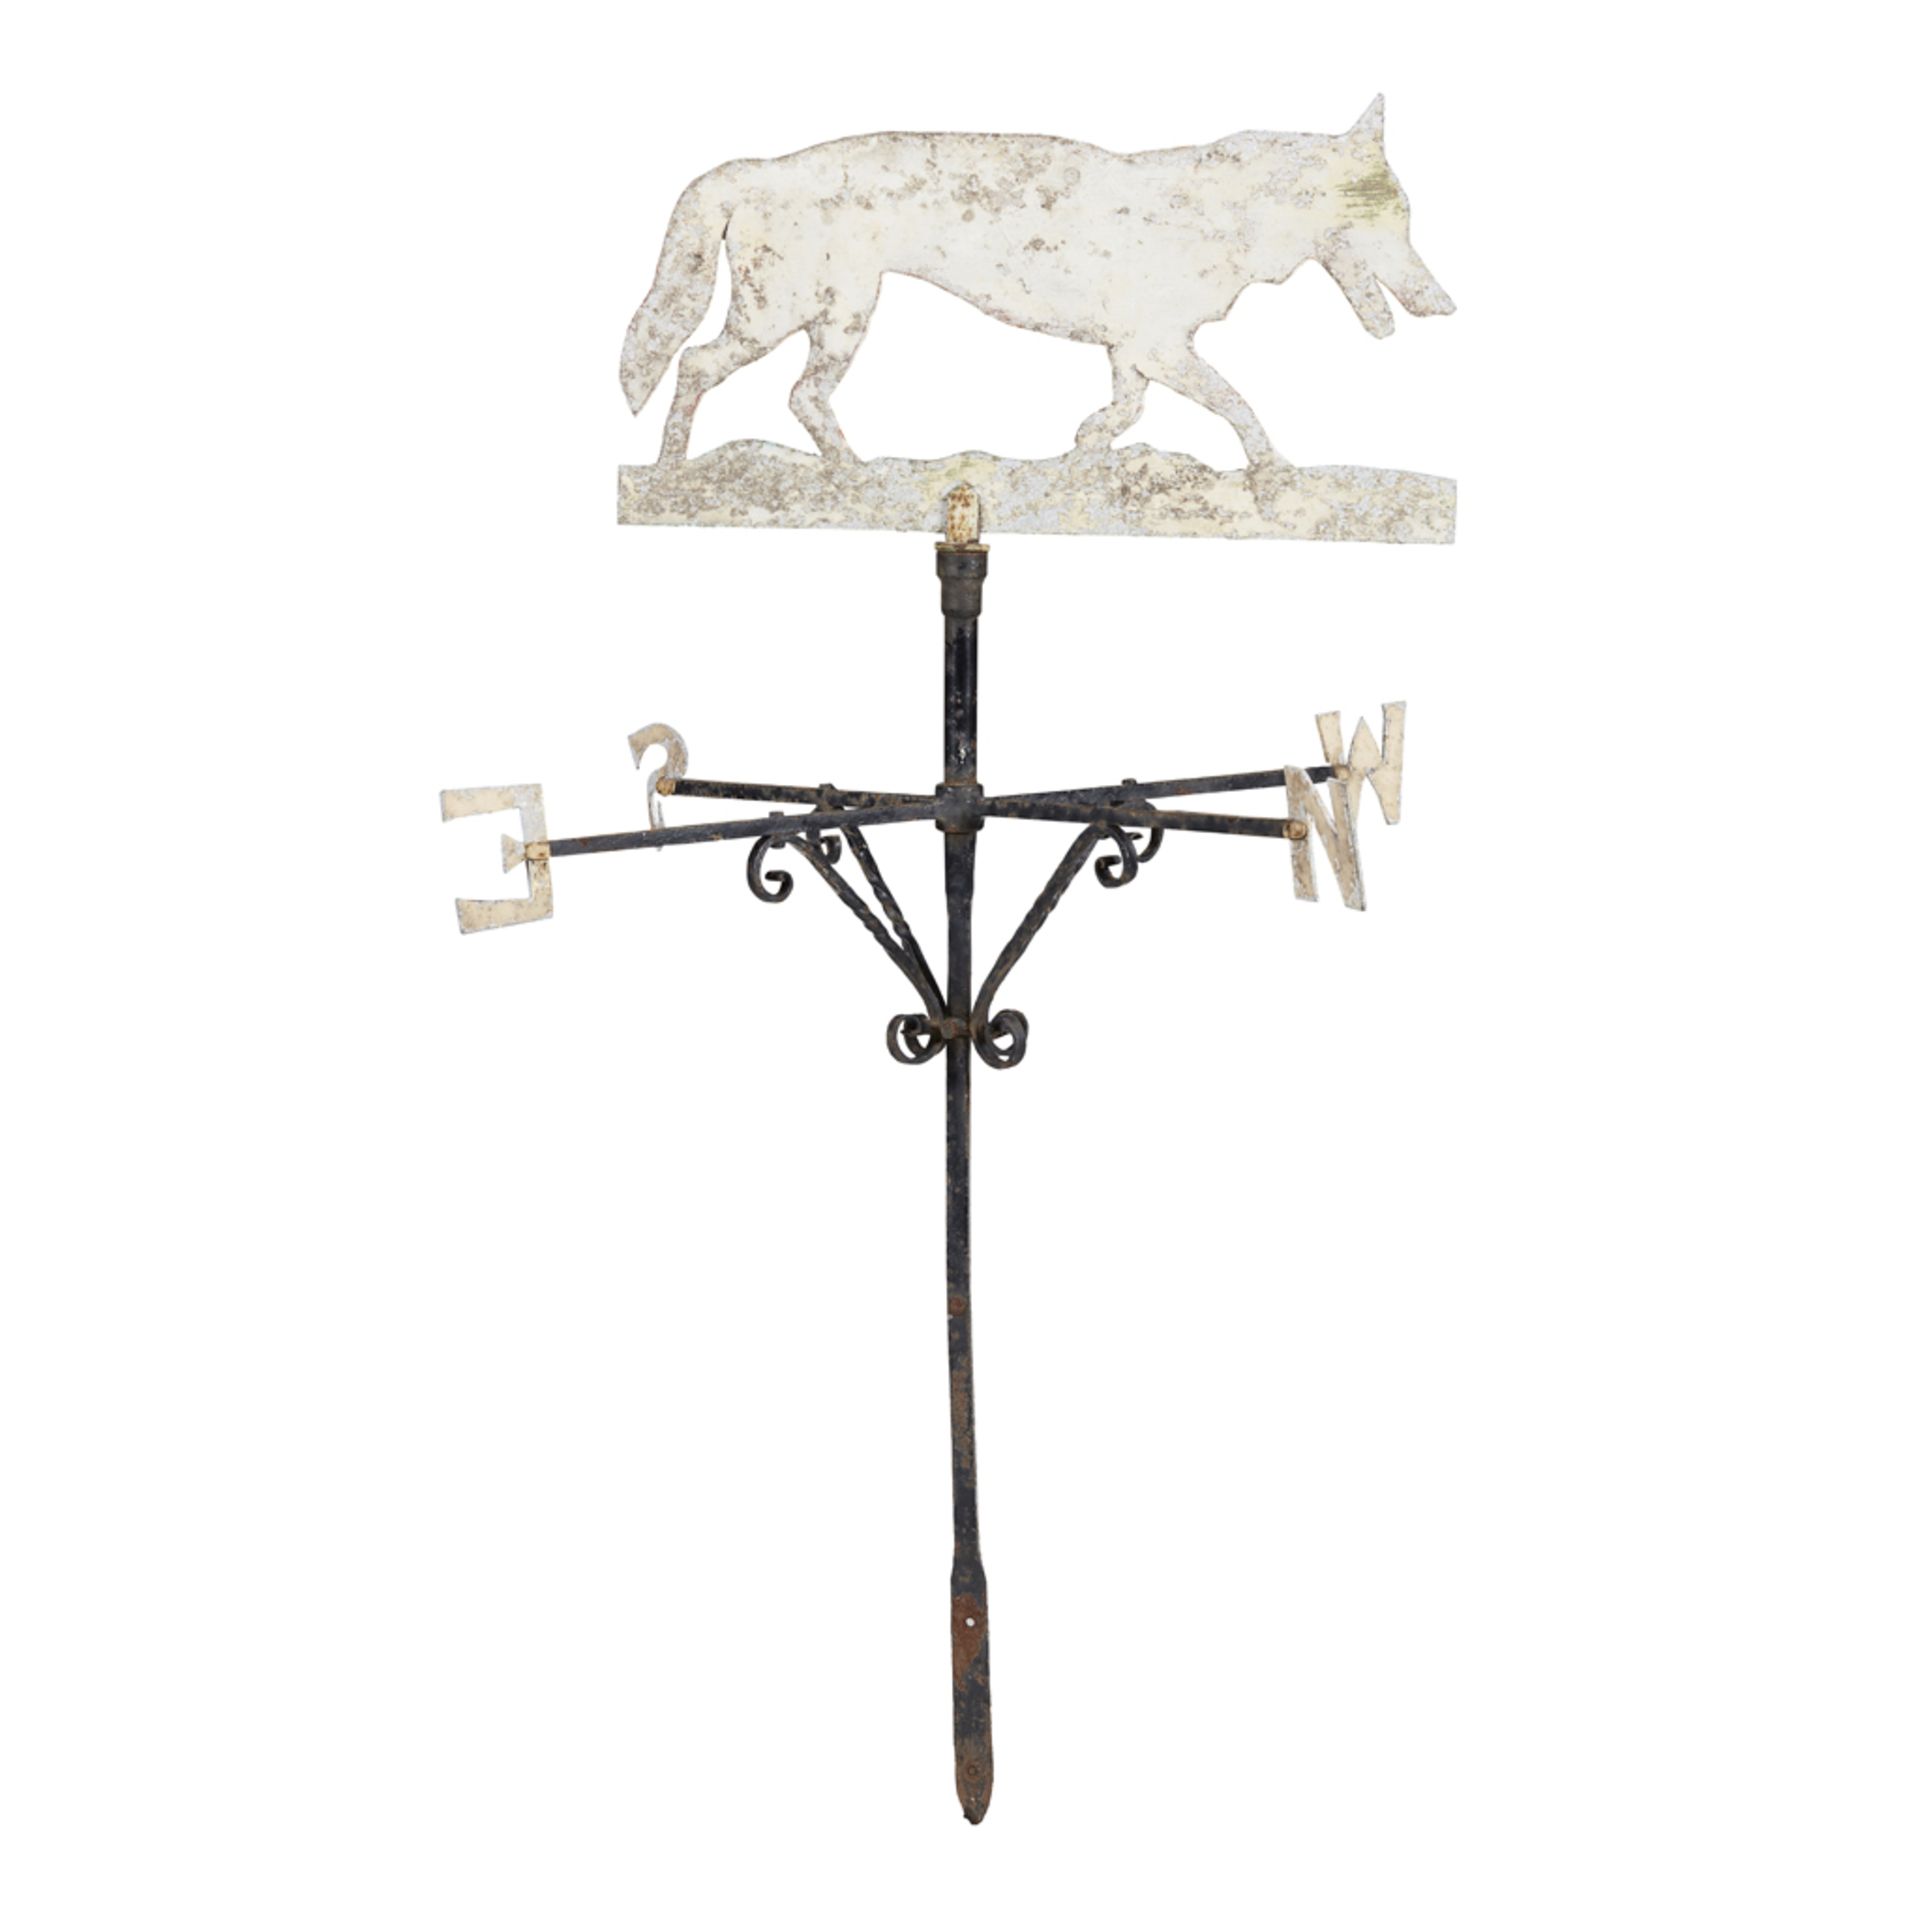 PAINTED METAL AND WROUGHT IRON 'FOX' WEATHER VANE LATE 19TH CENTURY/ EARLY 20TH CENTURY mounted with